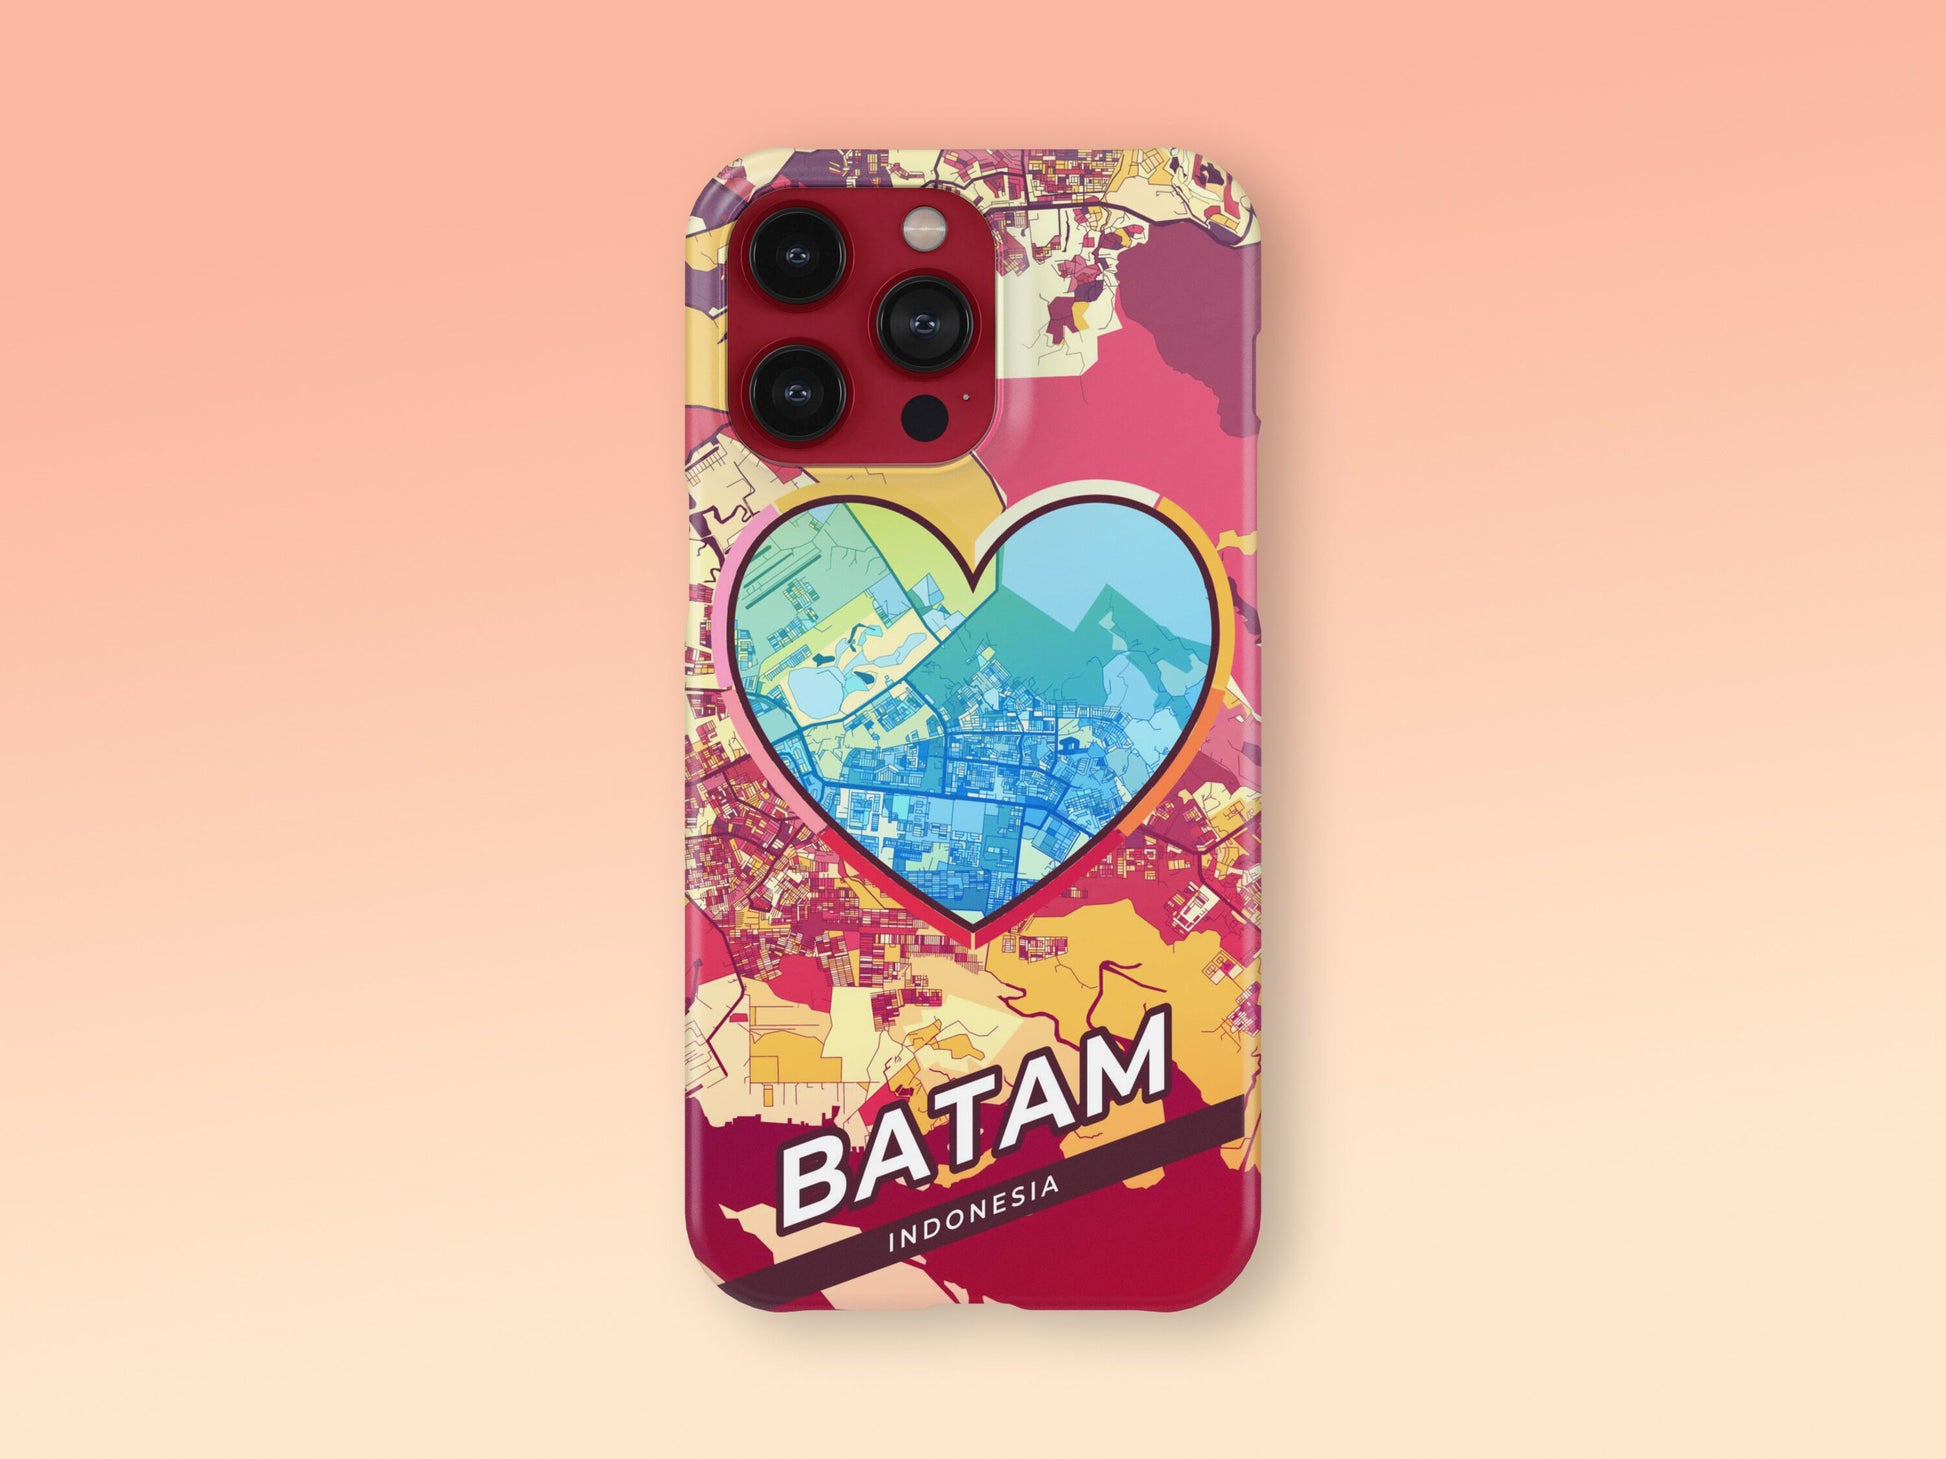 Batam Indonesia slim phone case with colorful icon. Birthday, wedding or housewarming gift. Couple match cases. 2